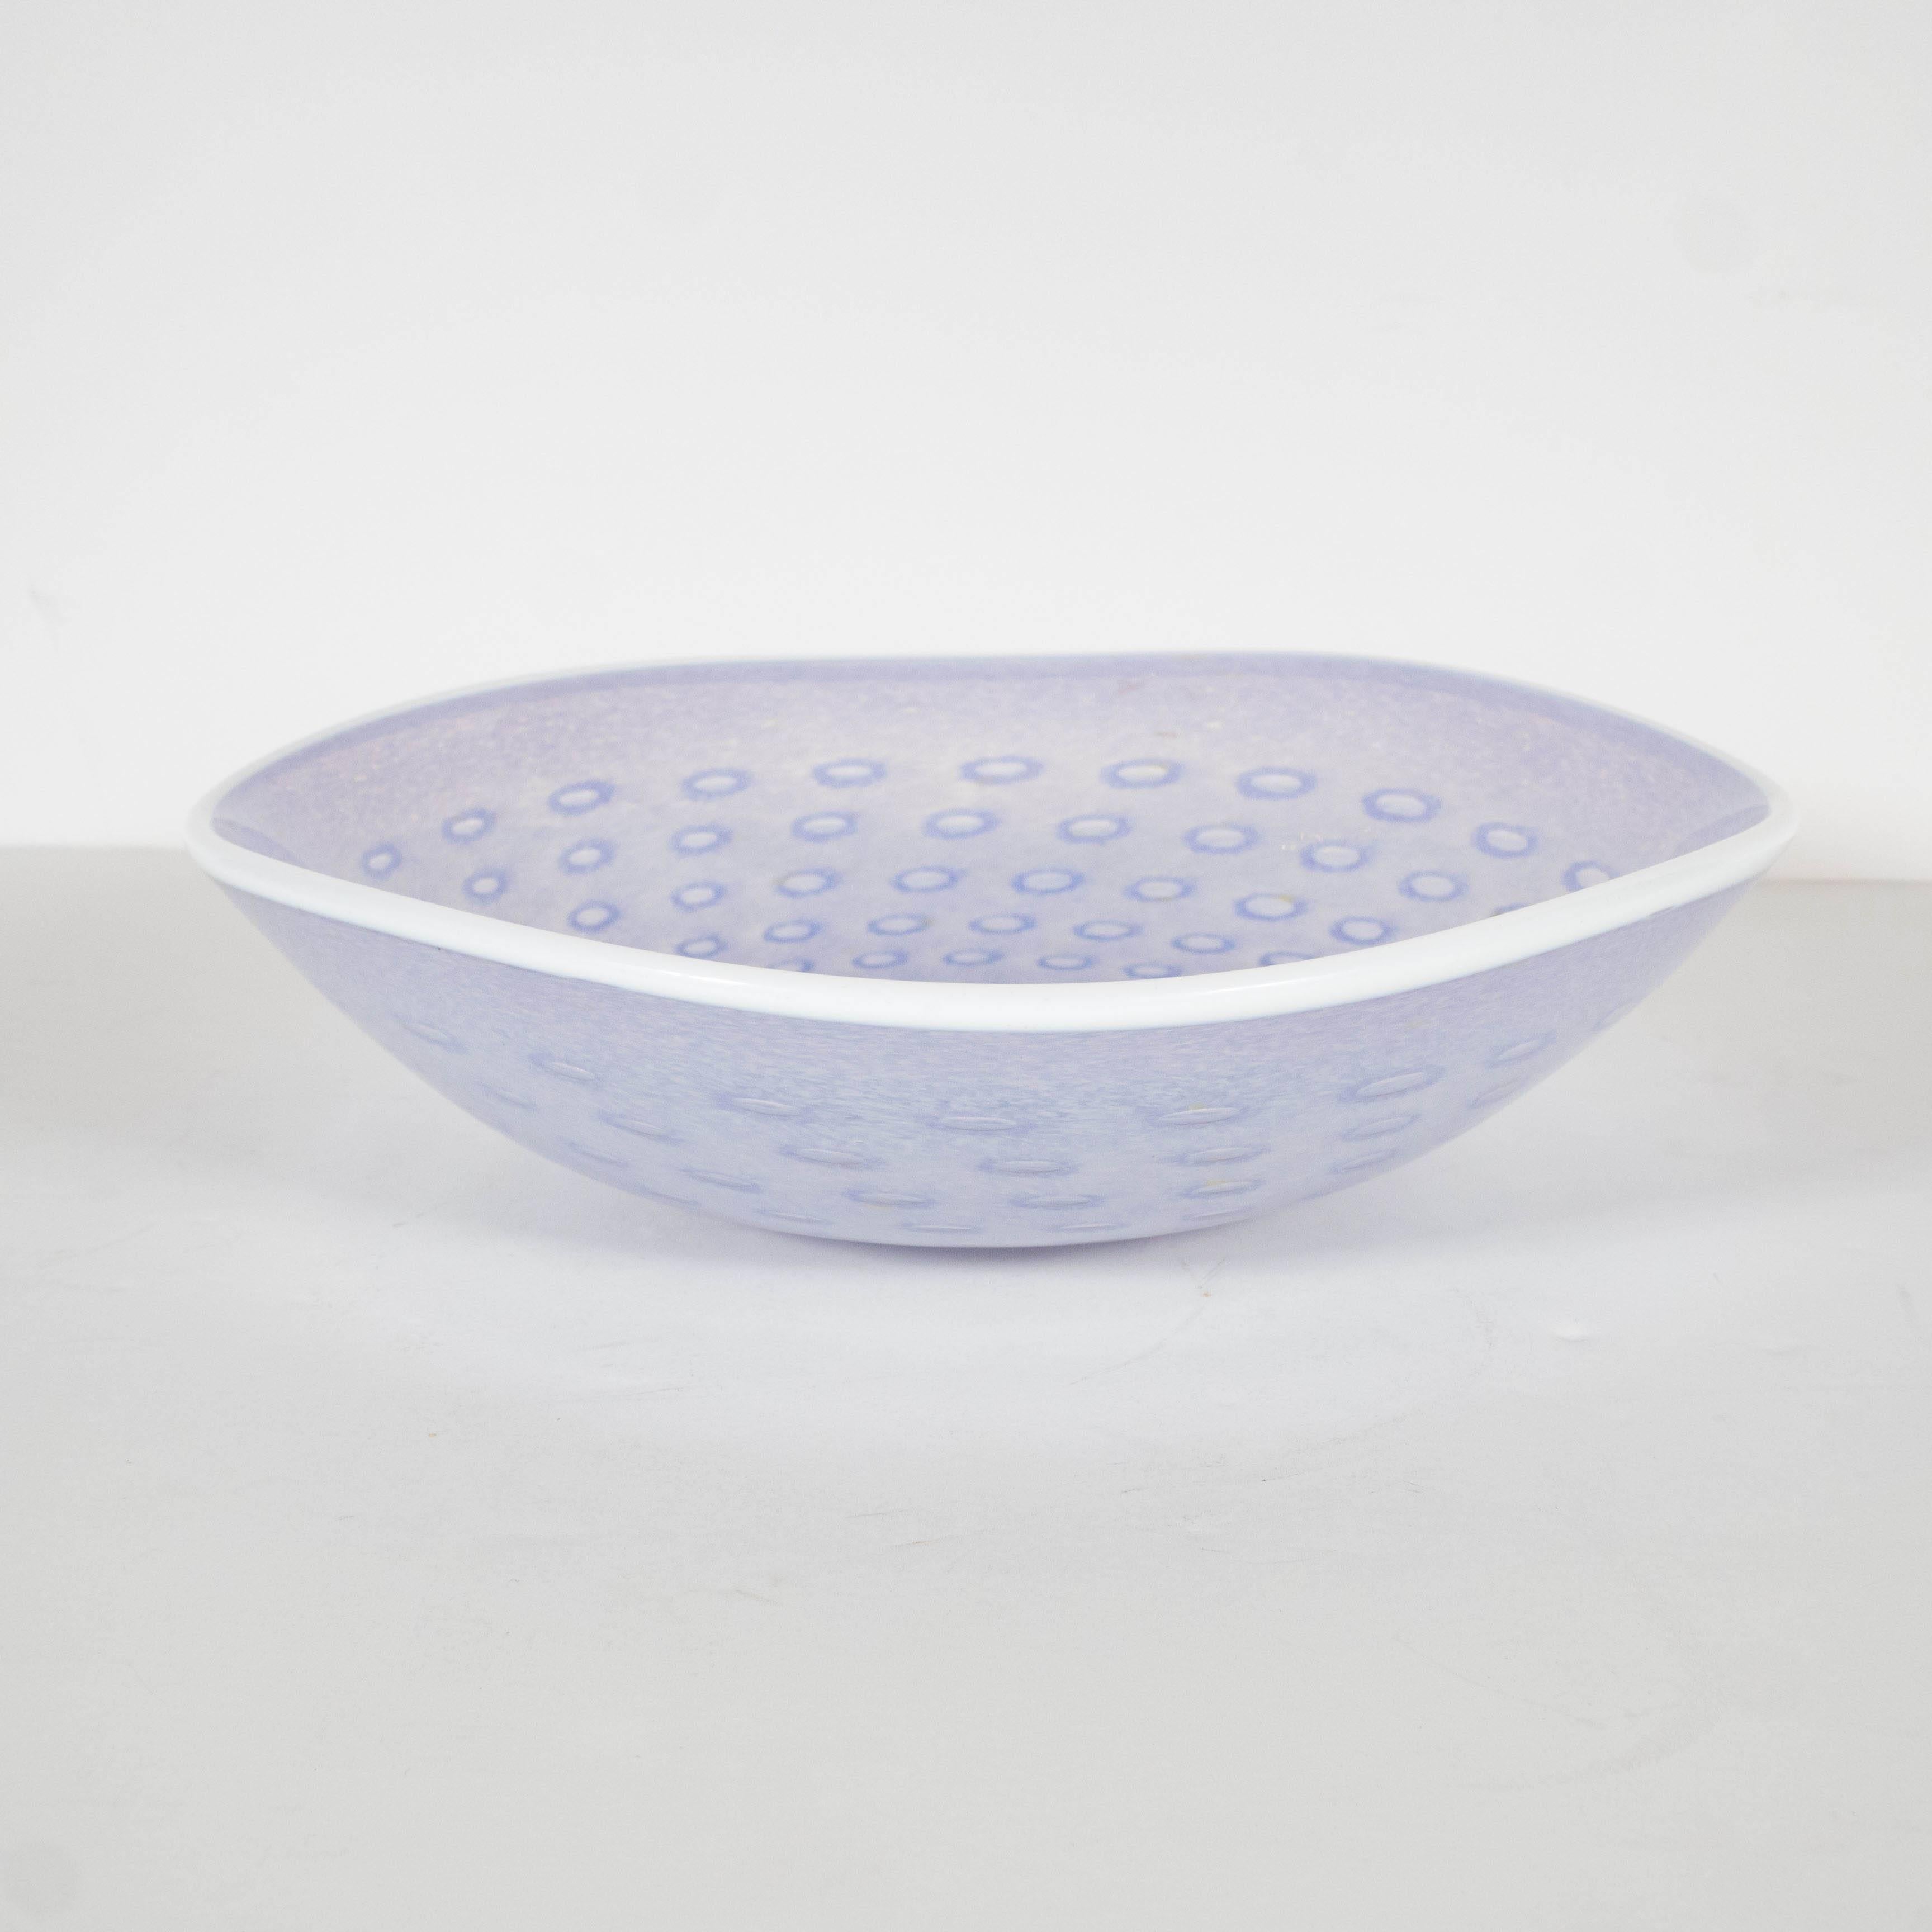 Mid-20th Century Translucent Handblown Murano Glass Bowl in Whites and Pale Lavender